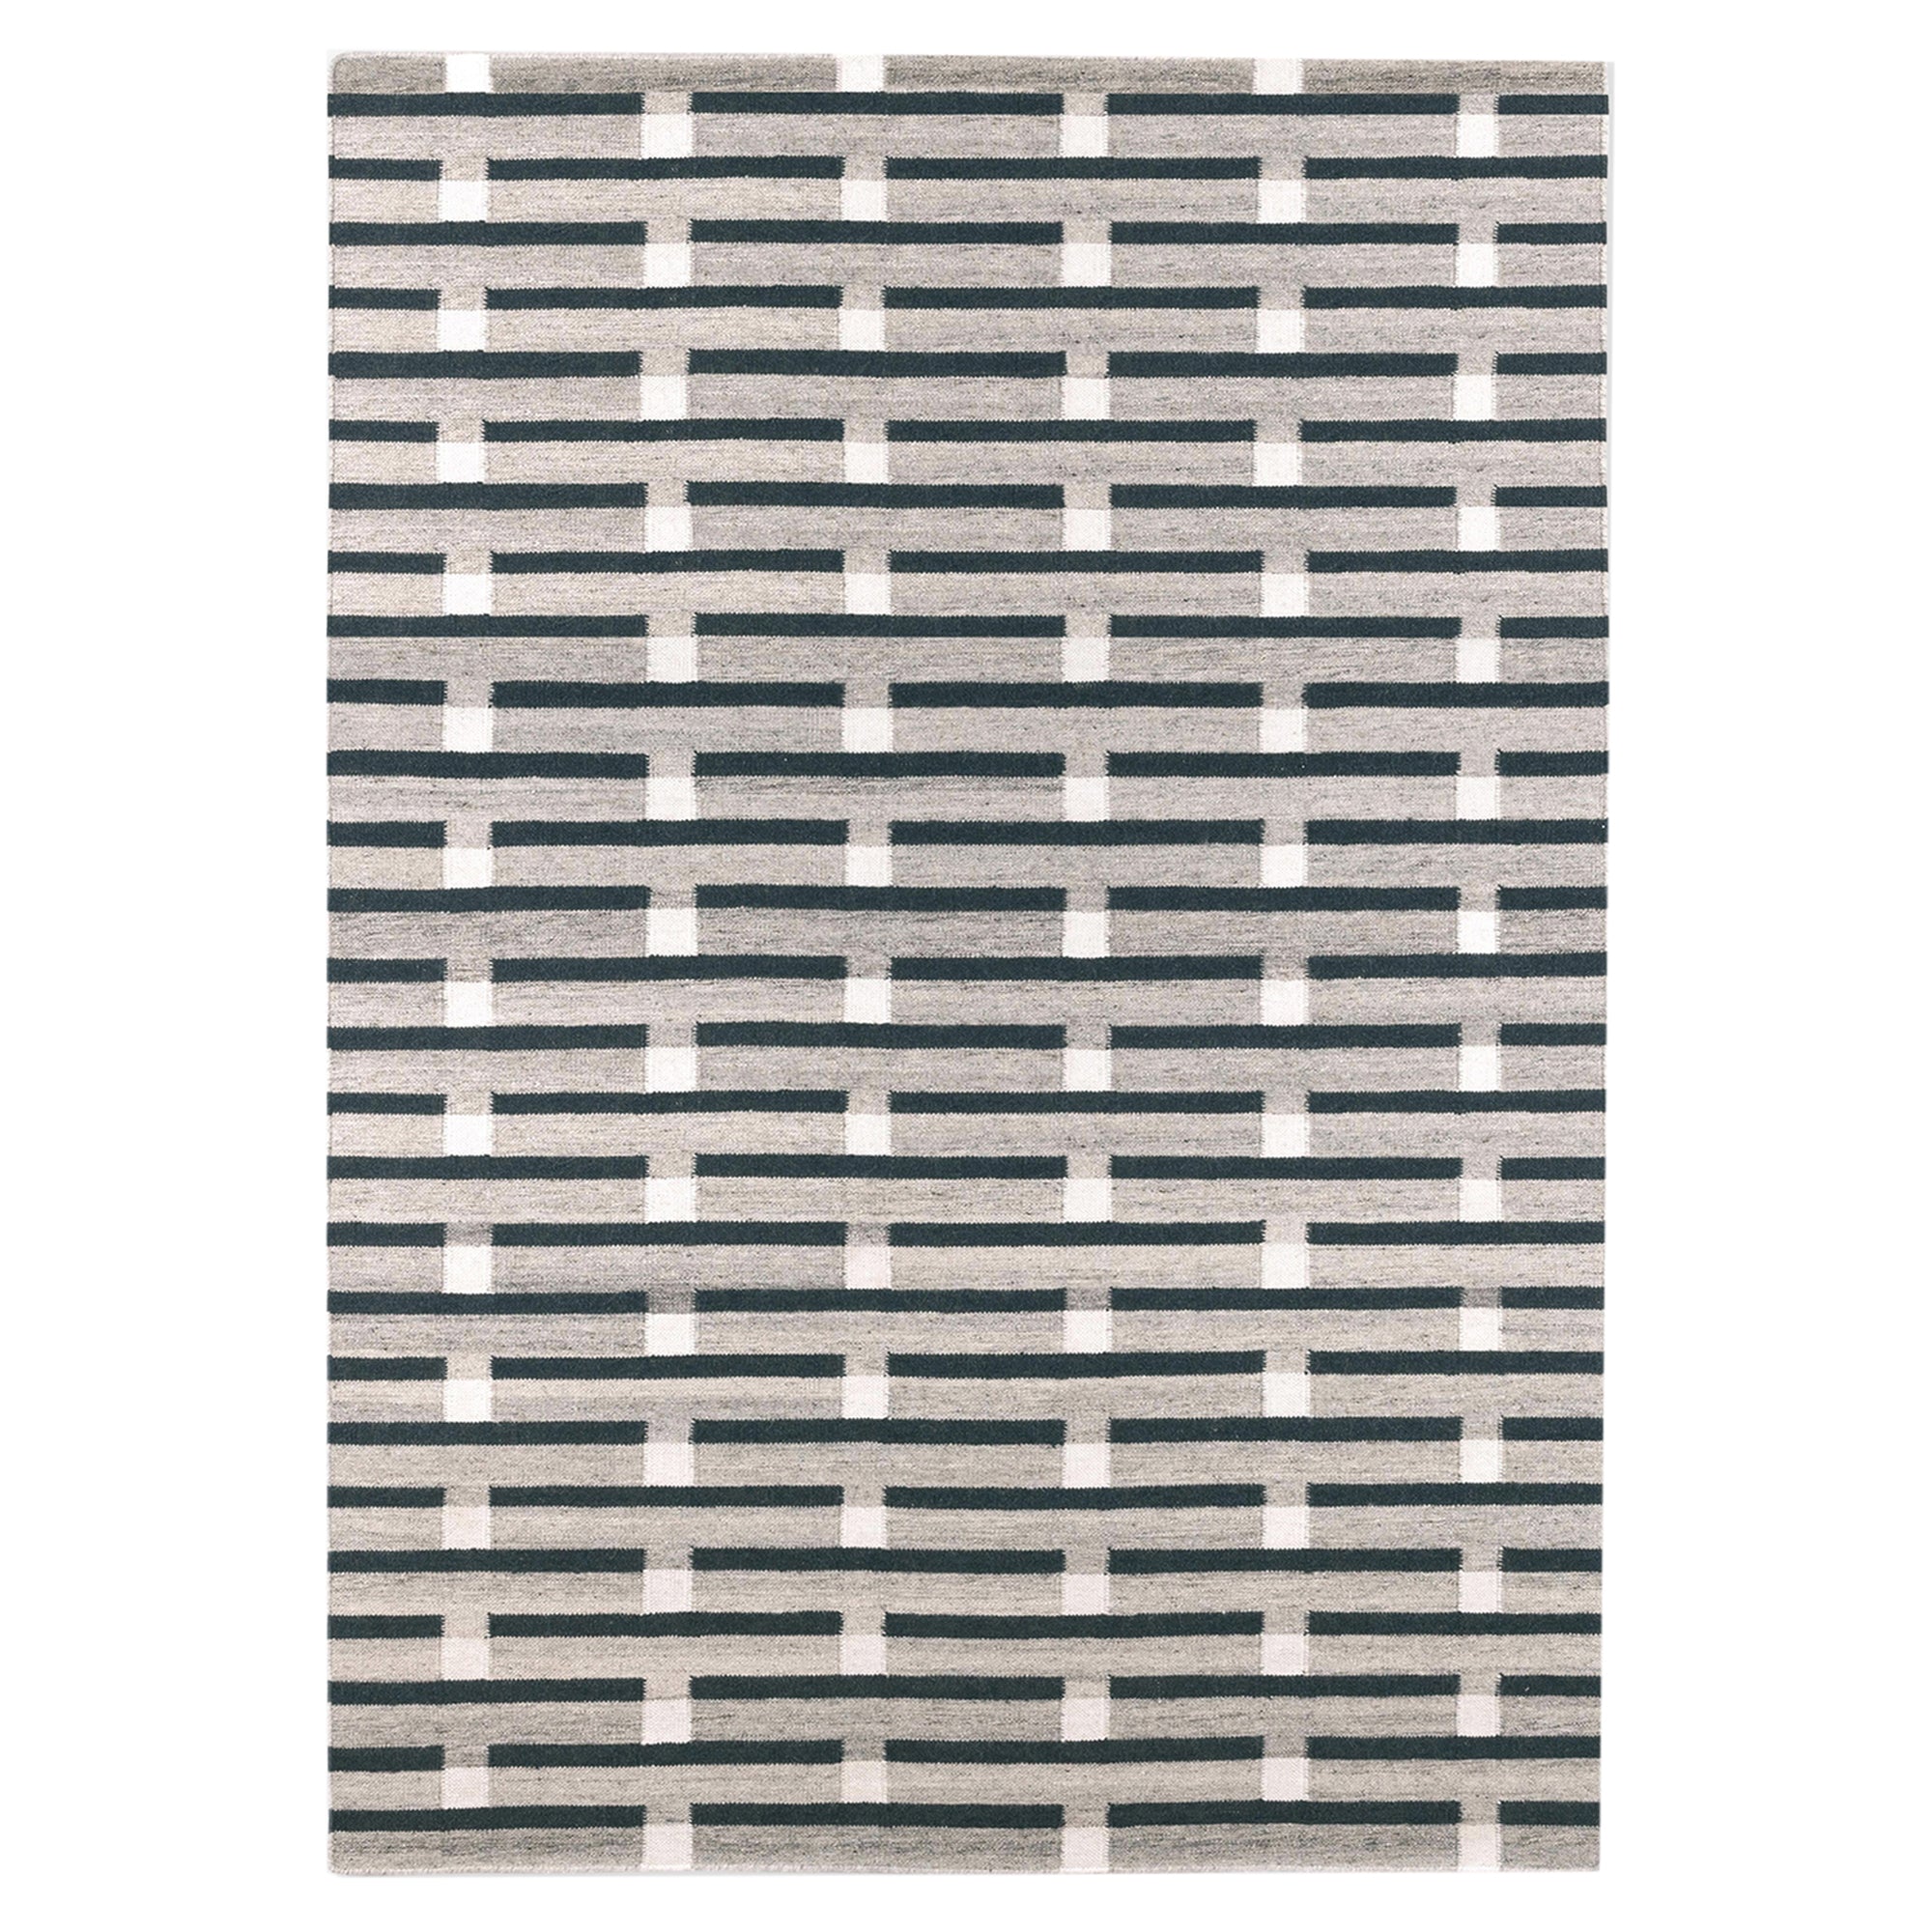 Purlin Rug: Large - 118.1